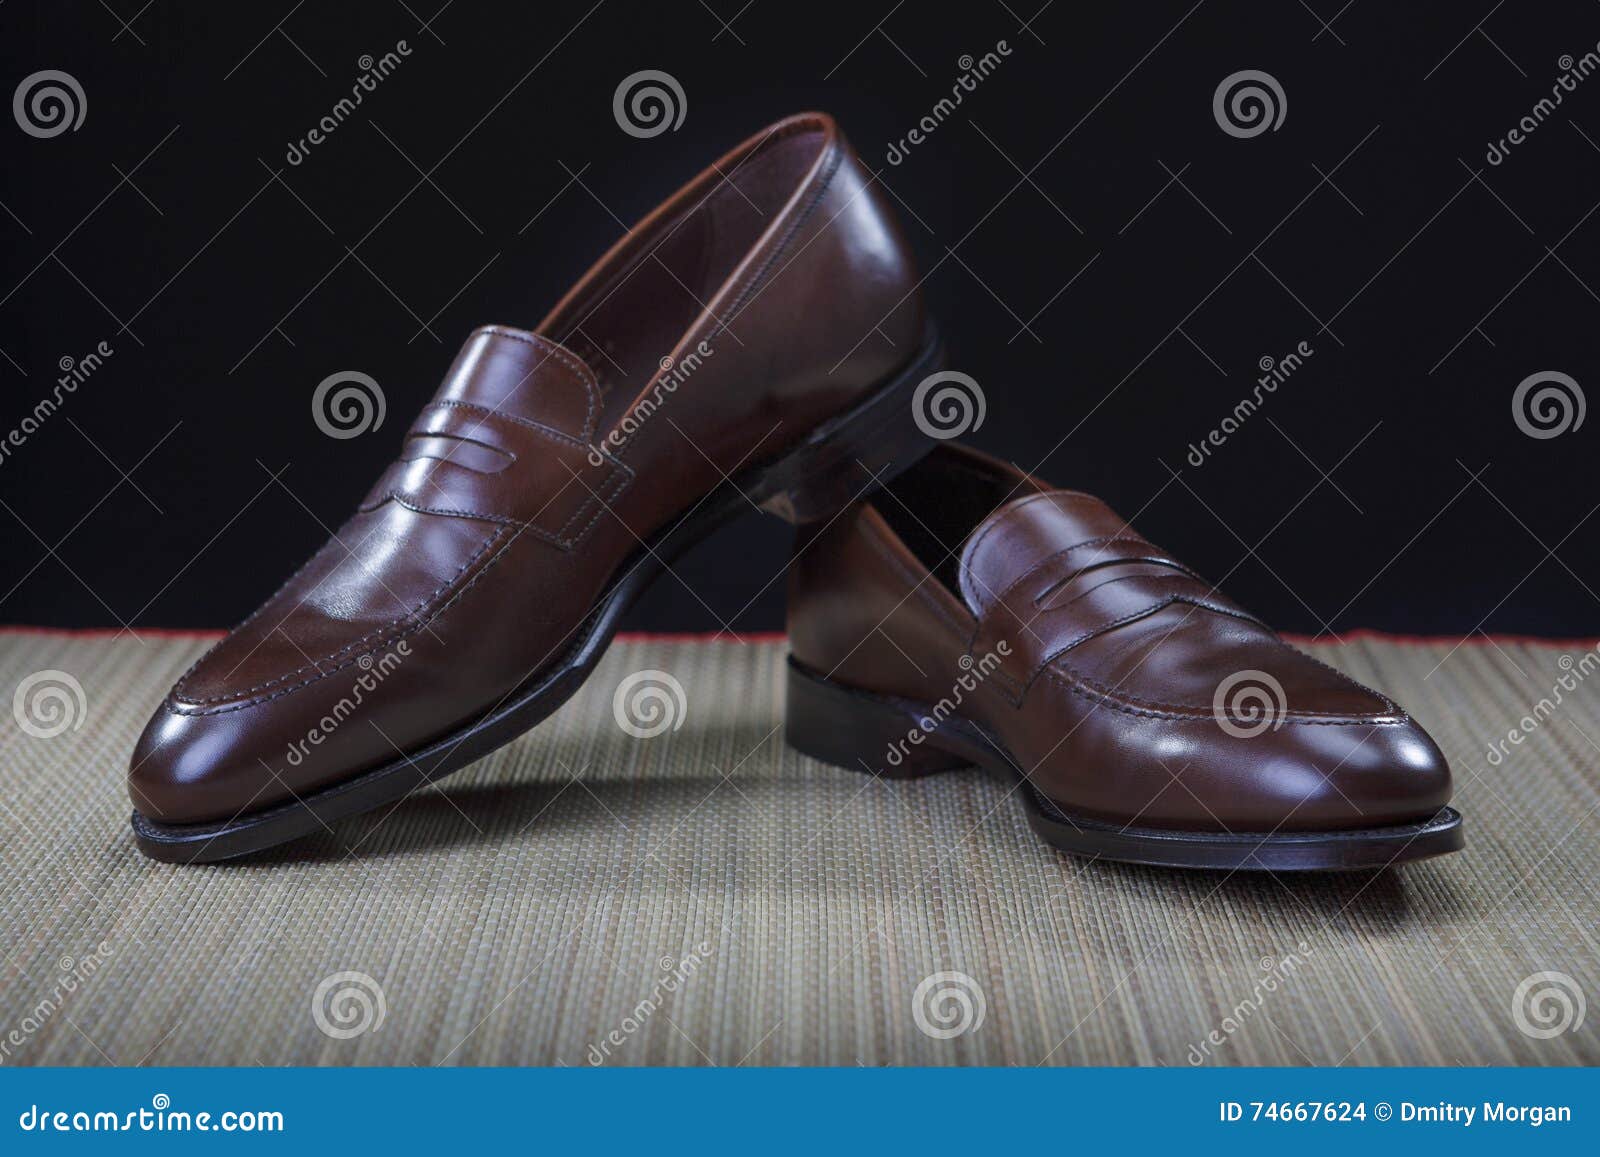 expensive penny loafers